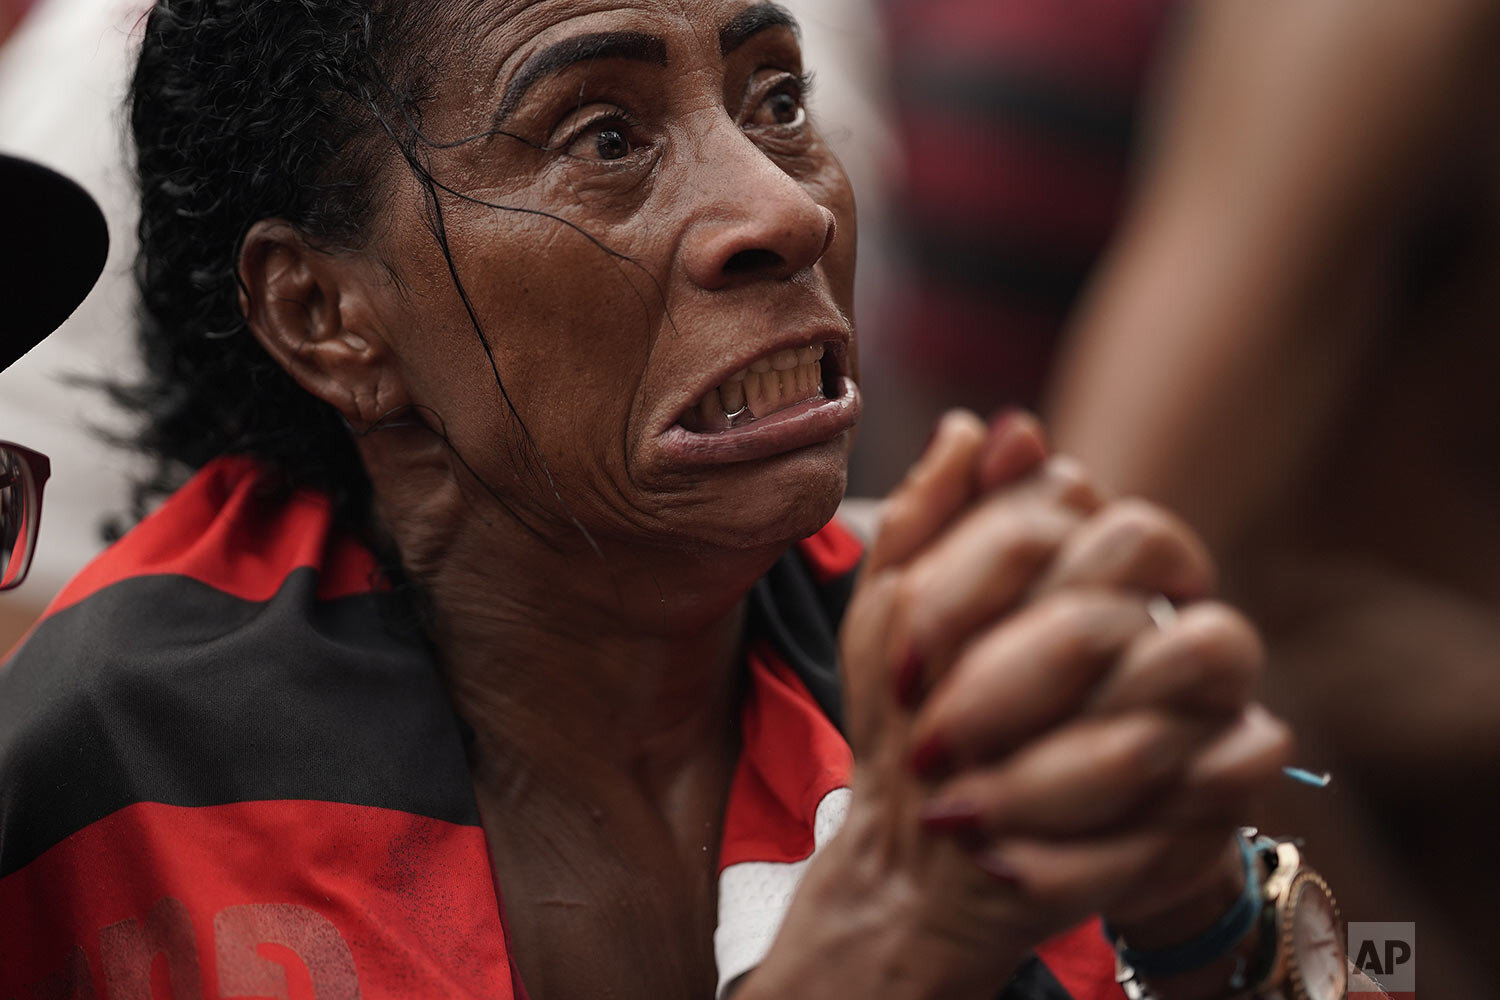  A fan of Brazil's Flamengo soccer team reacts after England's Liverpool scored a goal against her team as she watches a live broadcast of the FIFA Club World Cup final soccer match, in the Rocinha slum in Rio de Janeiro, Brazil, Dec. 21, 2019. (AP P